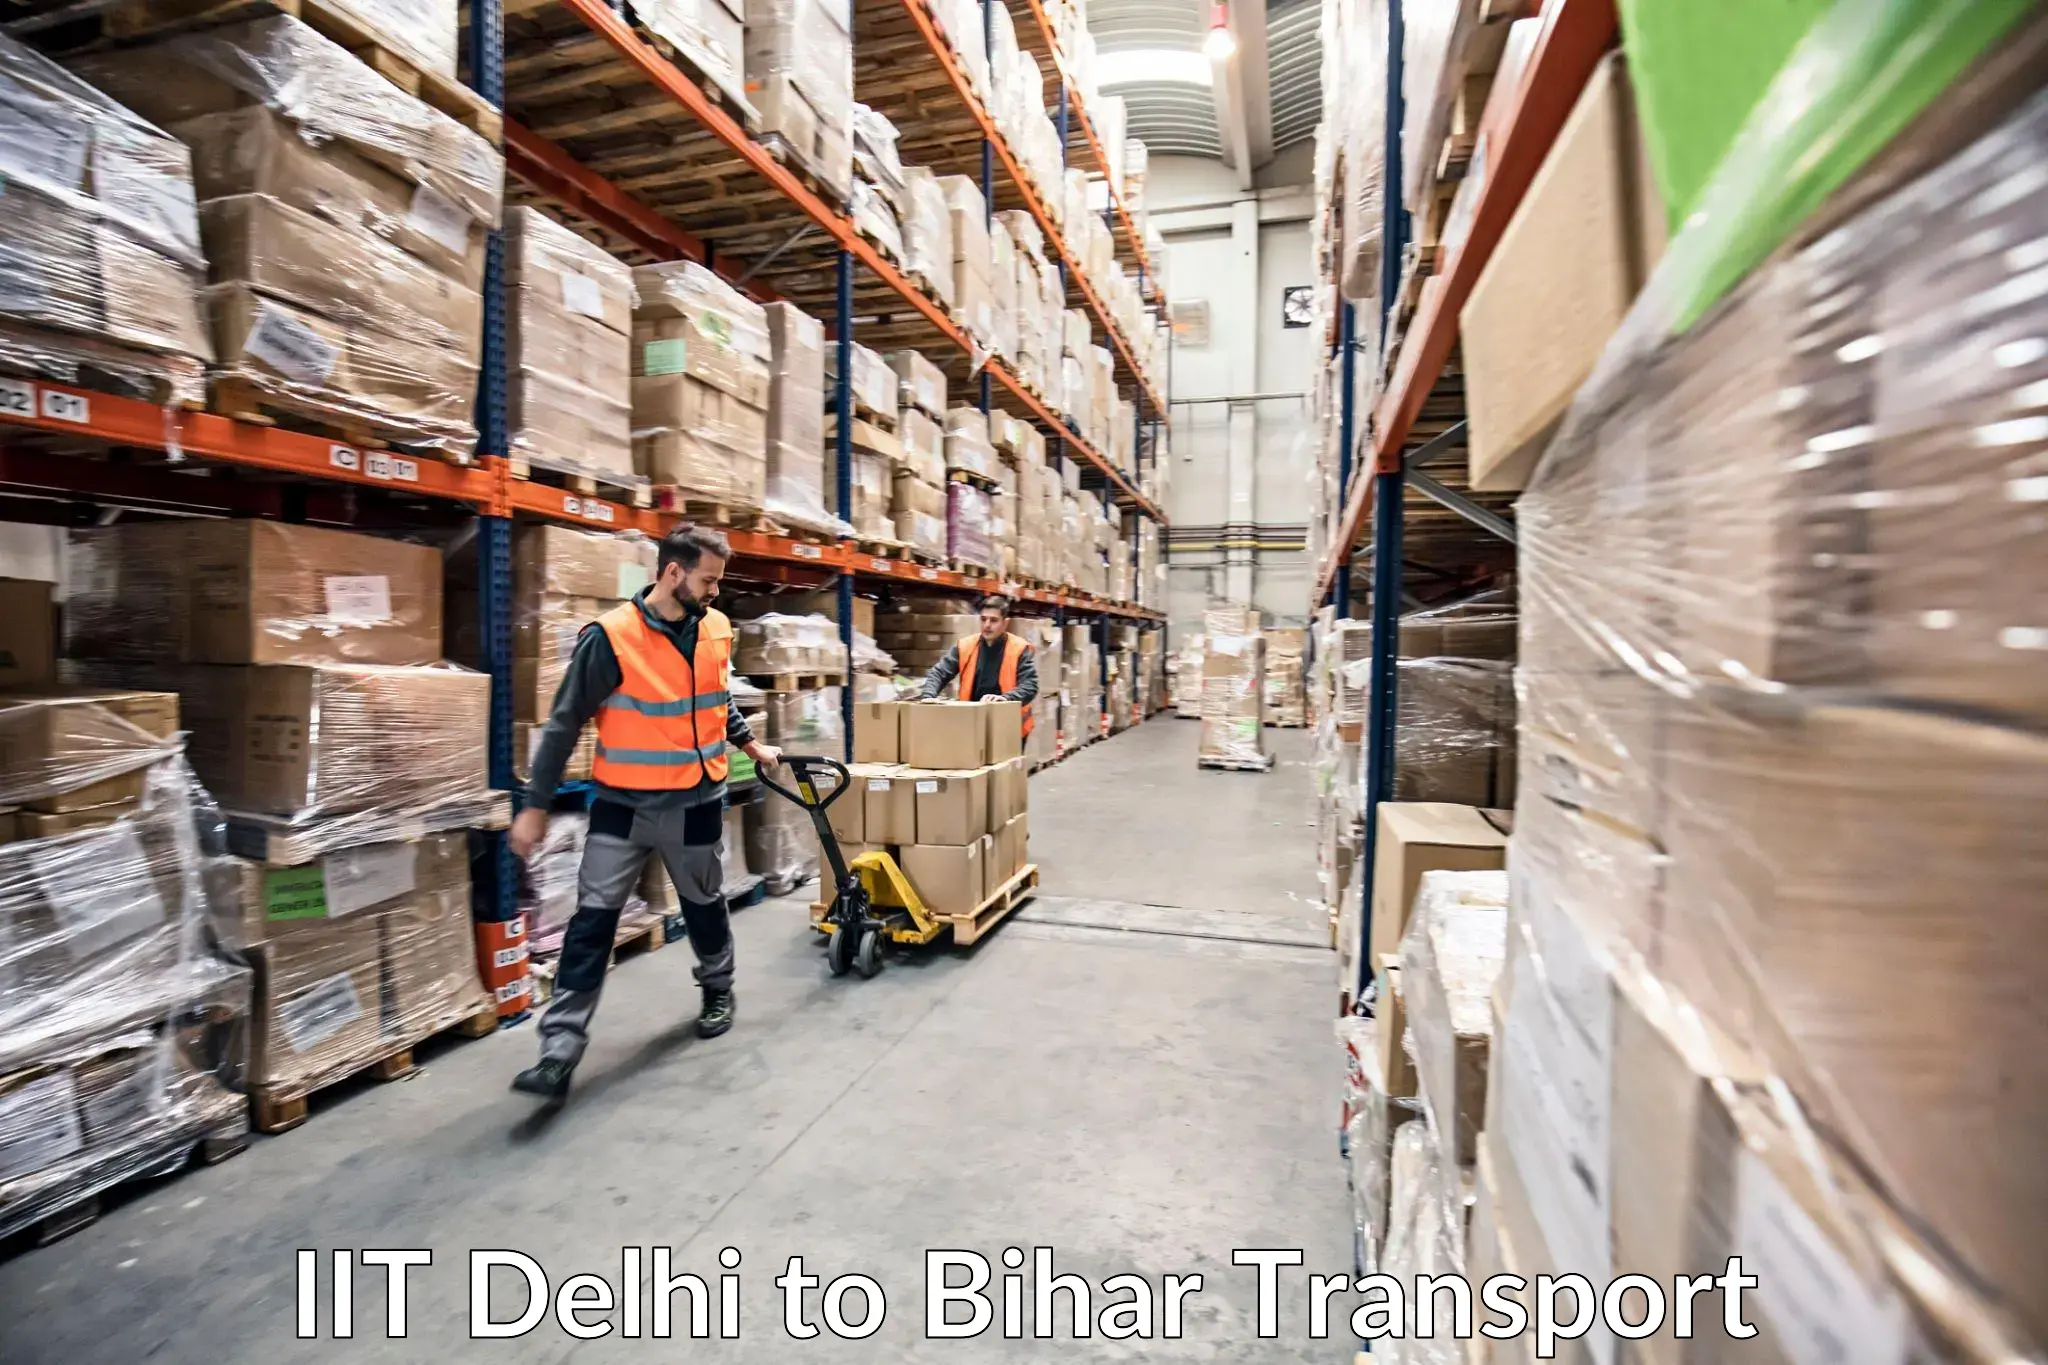 Container transport service IIT Delhi to Chainpur